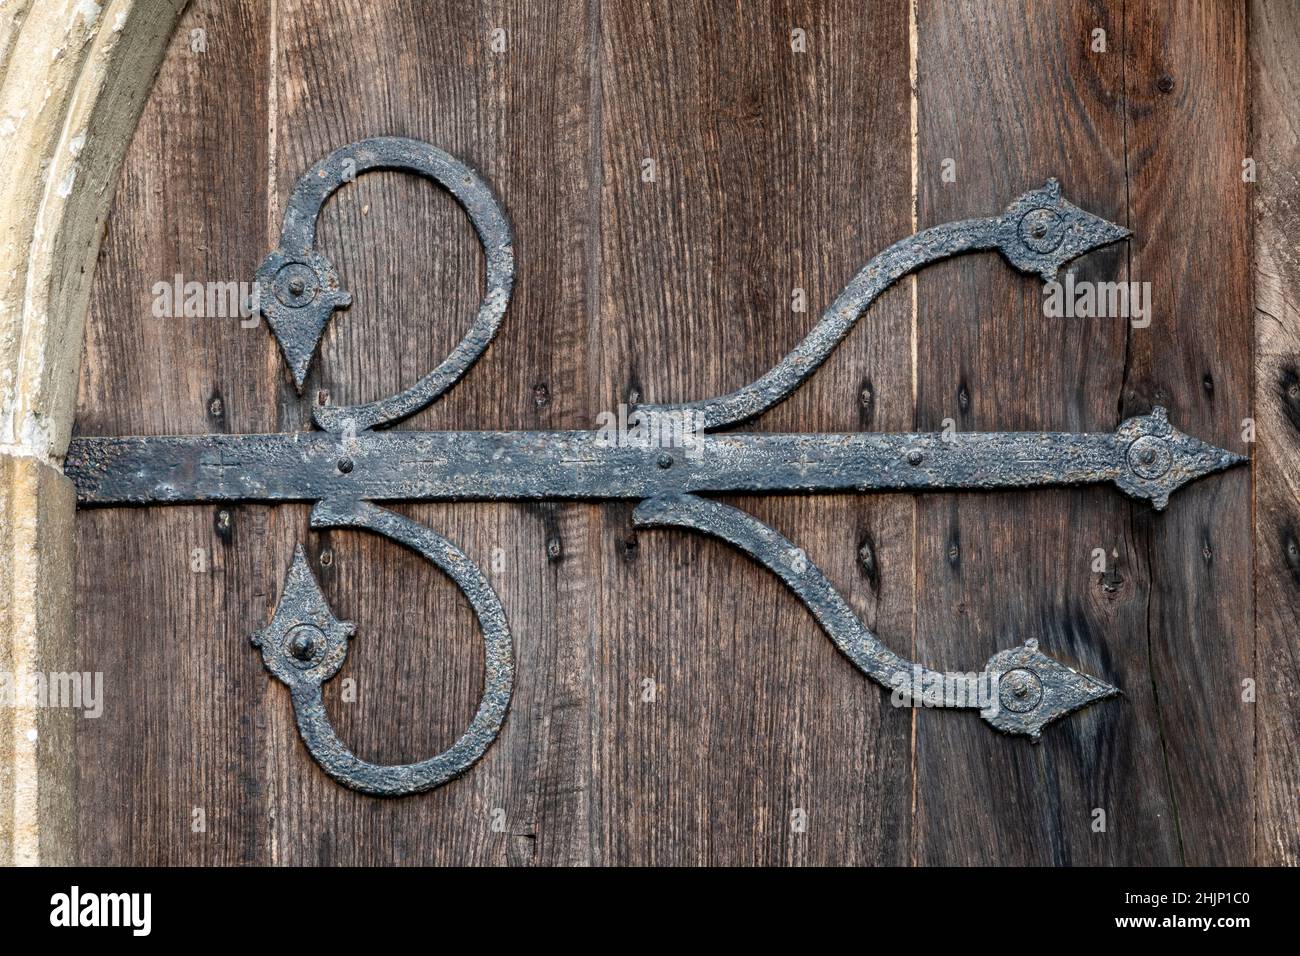 Wrought iron hinge door detail at The Church of St Lawrence, Brundish, Suffolk, UK Stock Photo